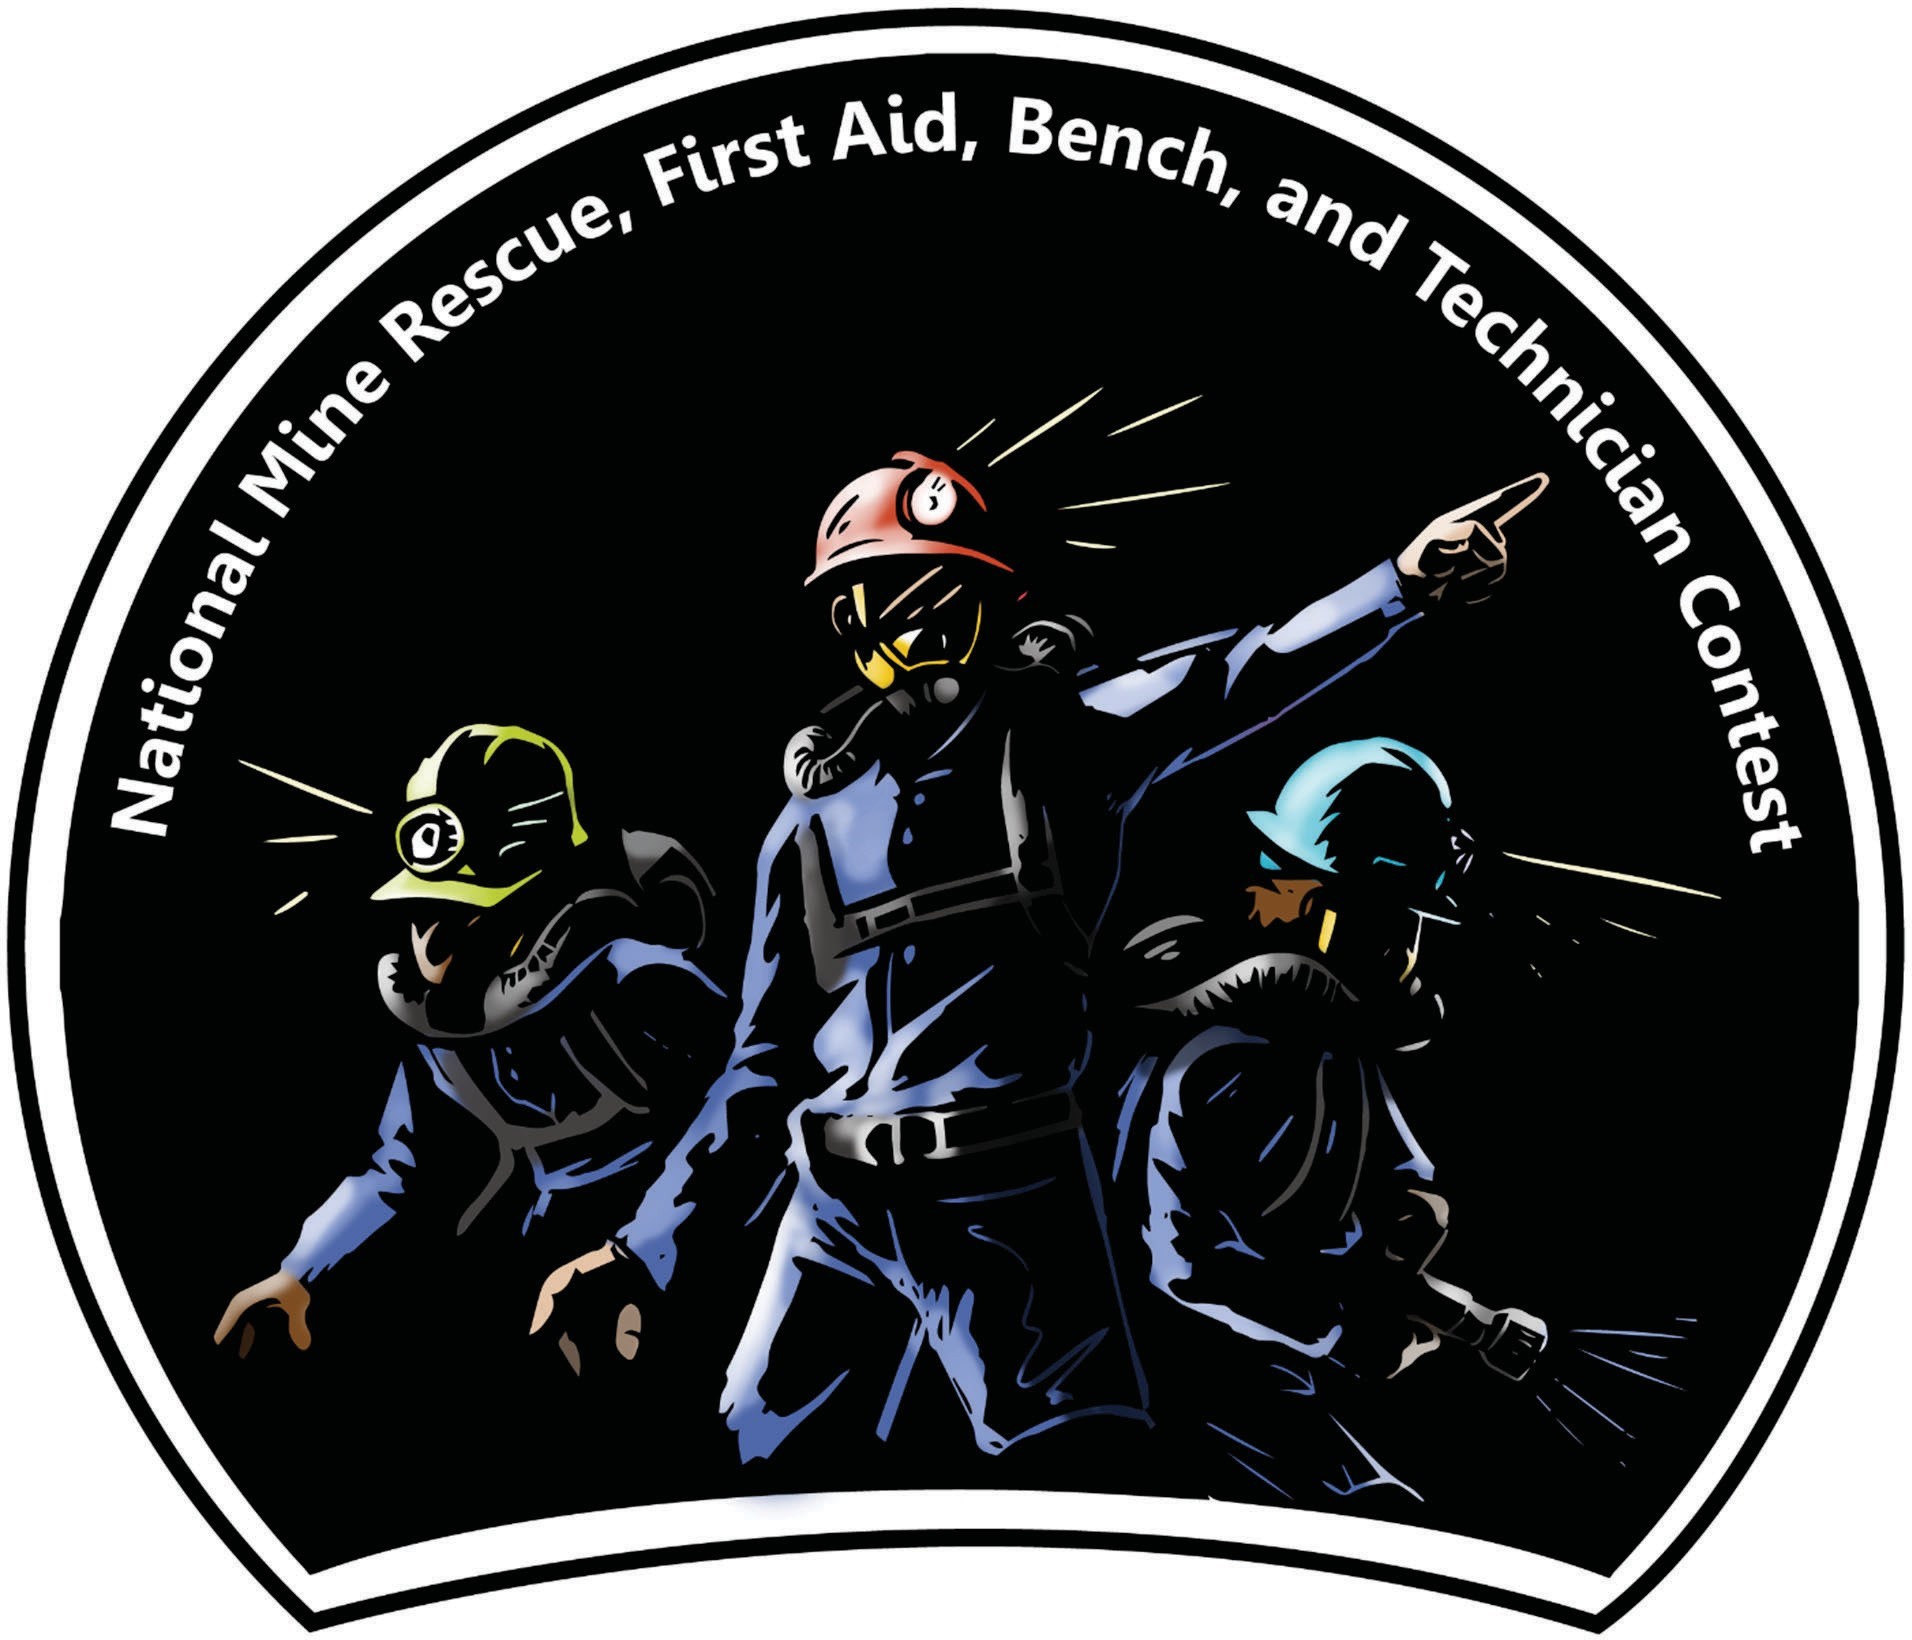 National Mine Rescue, first aid bench and technical contest, Seal